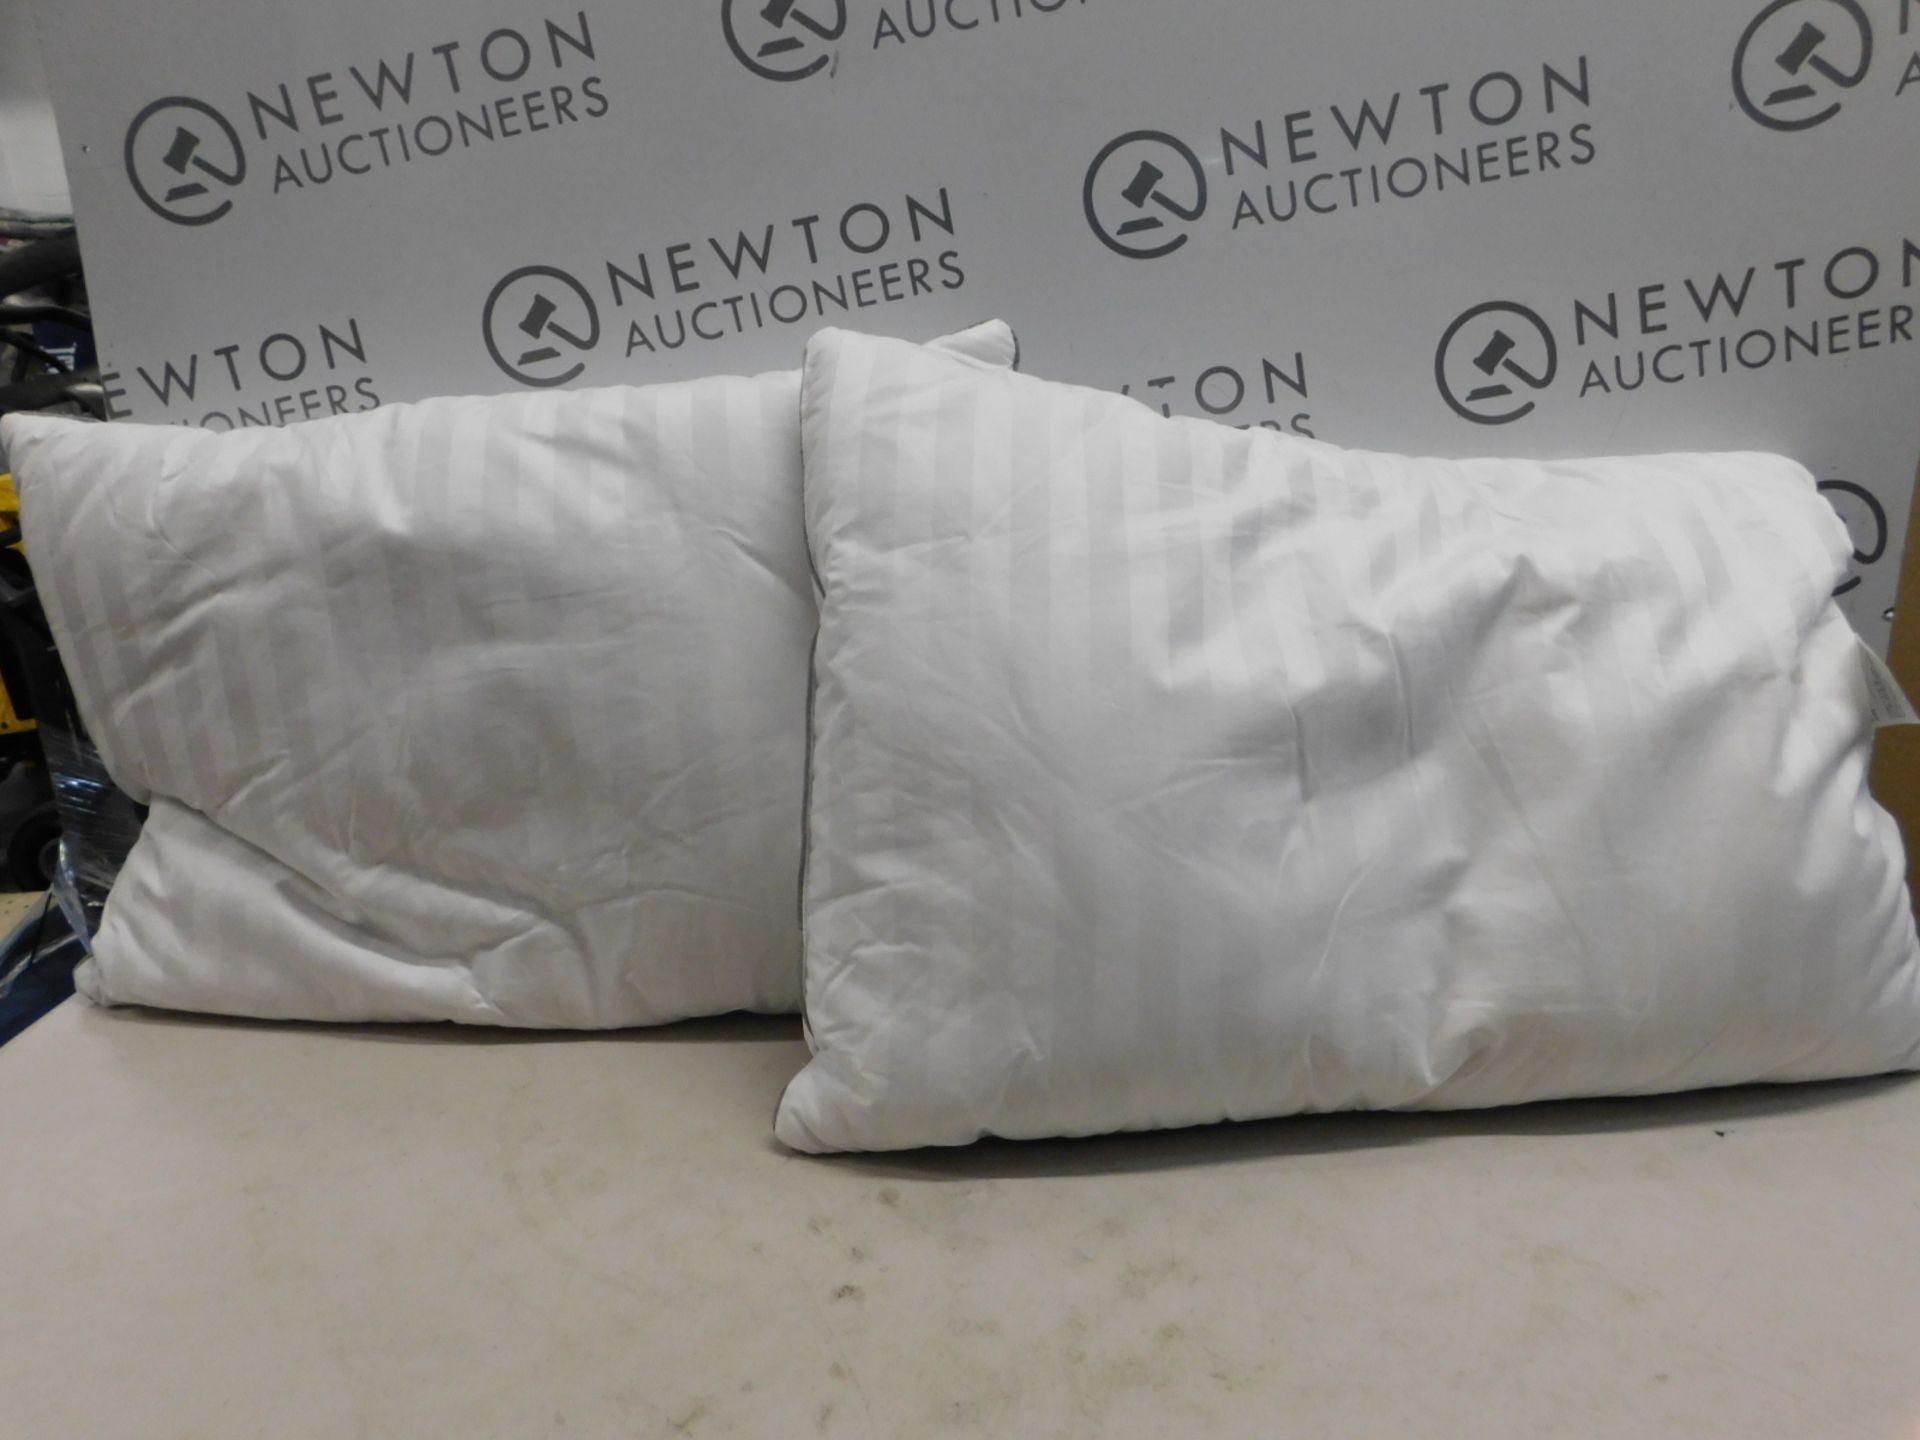 1 PAIR OF HOTEL GRAND DOUBLE TOP GOOSE FEATHER & GOOSE DOWN PILLOWS RRP Â£39.99